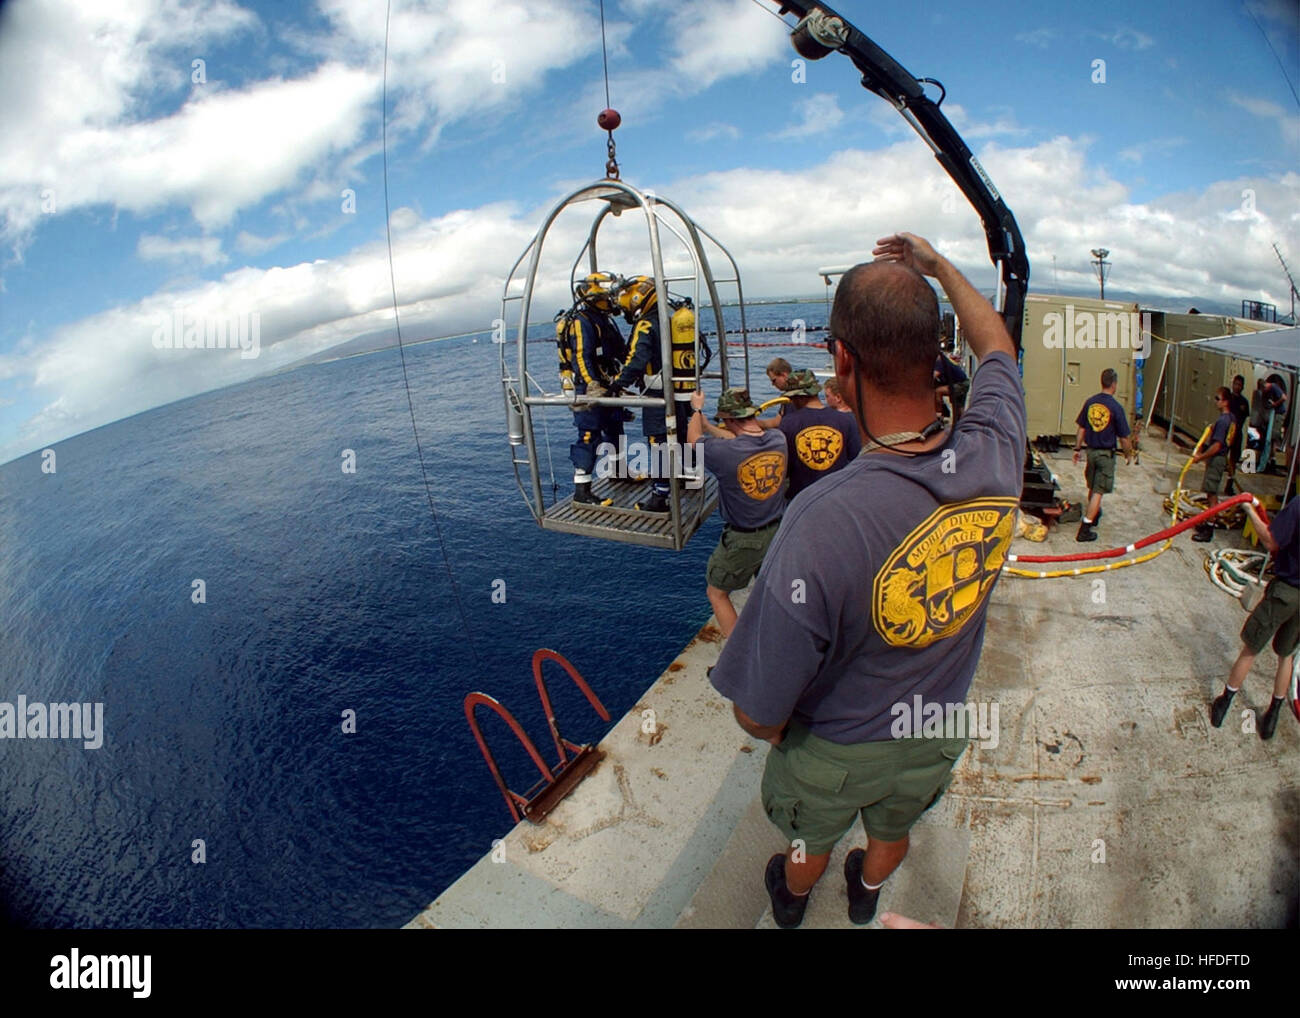 011031-N-3093M-032  --  Honolulu, Hawaii (Oct. 31, 2001)-- U.S. Navy divers are hoisted over the side to begin another dive to recover remains and personal effect from the Japanese fishing vessel Ehime Maru. U.S. Navy and Japanese divers are working together at the shallow water recovery site off the coast of Hawaii.  U.S. Navy Photo By Photographer's Mate Chief Petty Officer Andrew McKaskle.  (RELEASED) US Navy 011031-N-3093M-032 Navy diver salvage operations Stock Photo